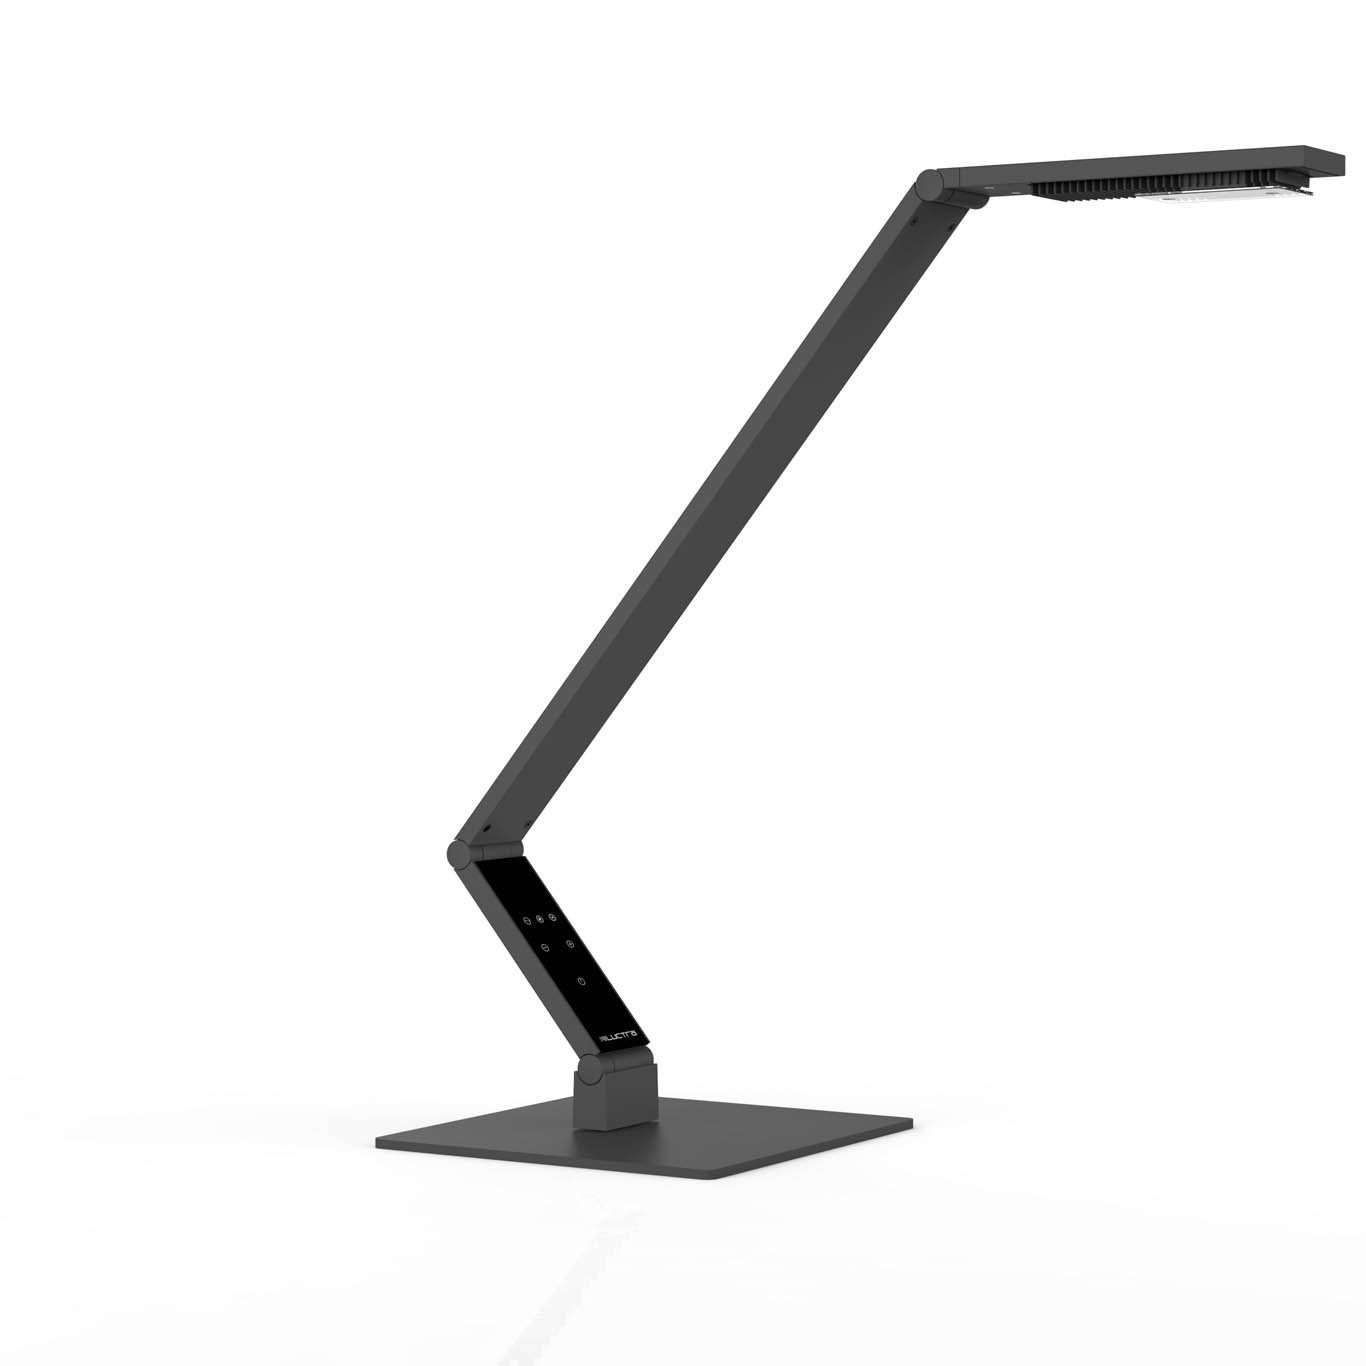 LUCTRA Tischleuchte TABLE LINEAR BASE, LUCTRA Table Linear Base Schreibtischlampe LED Dimmbar, schwarz, LED S